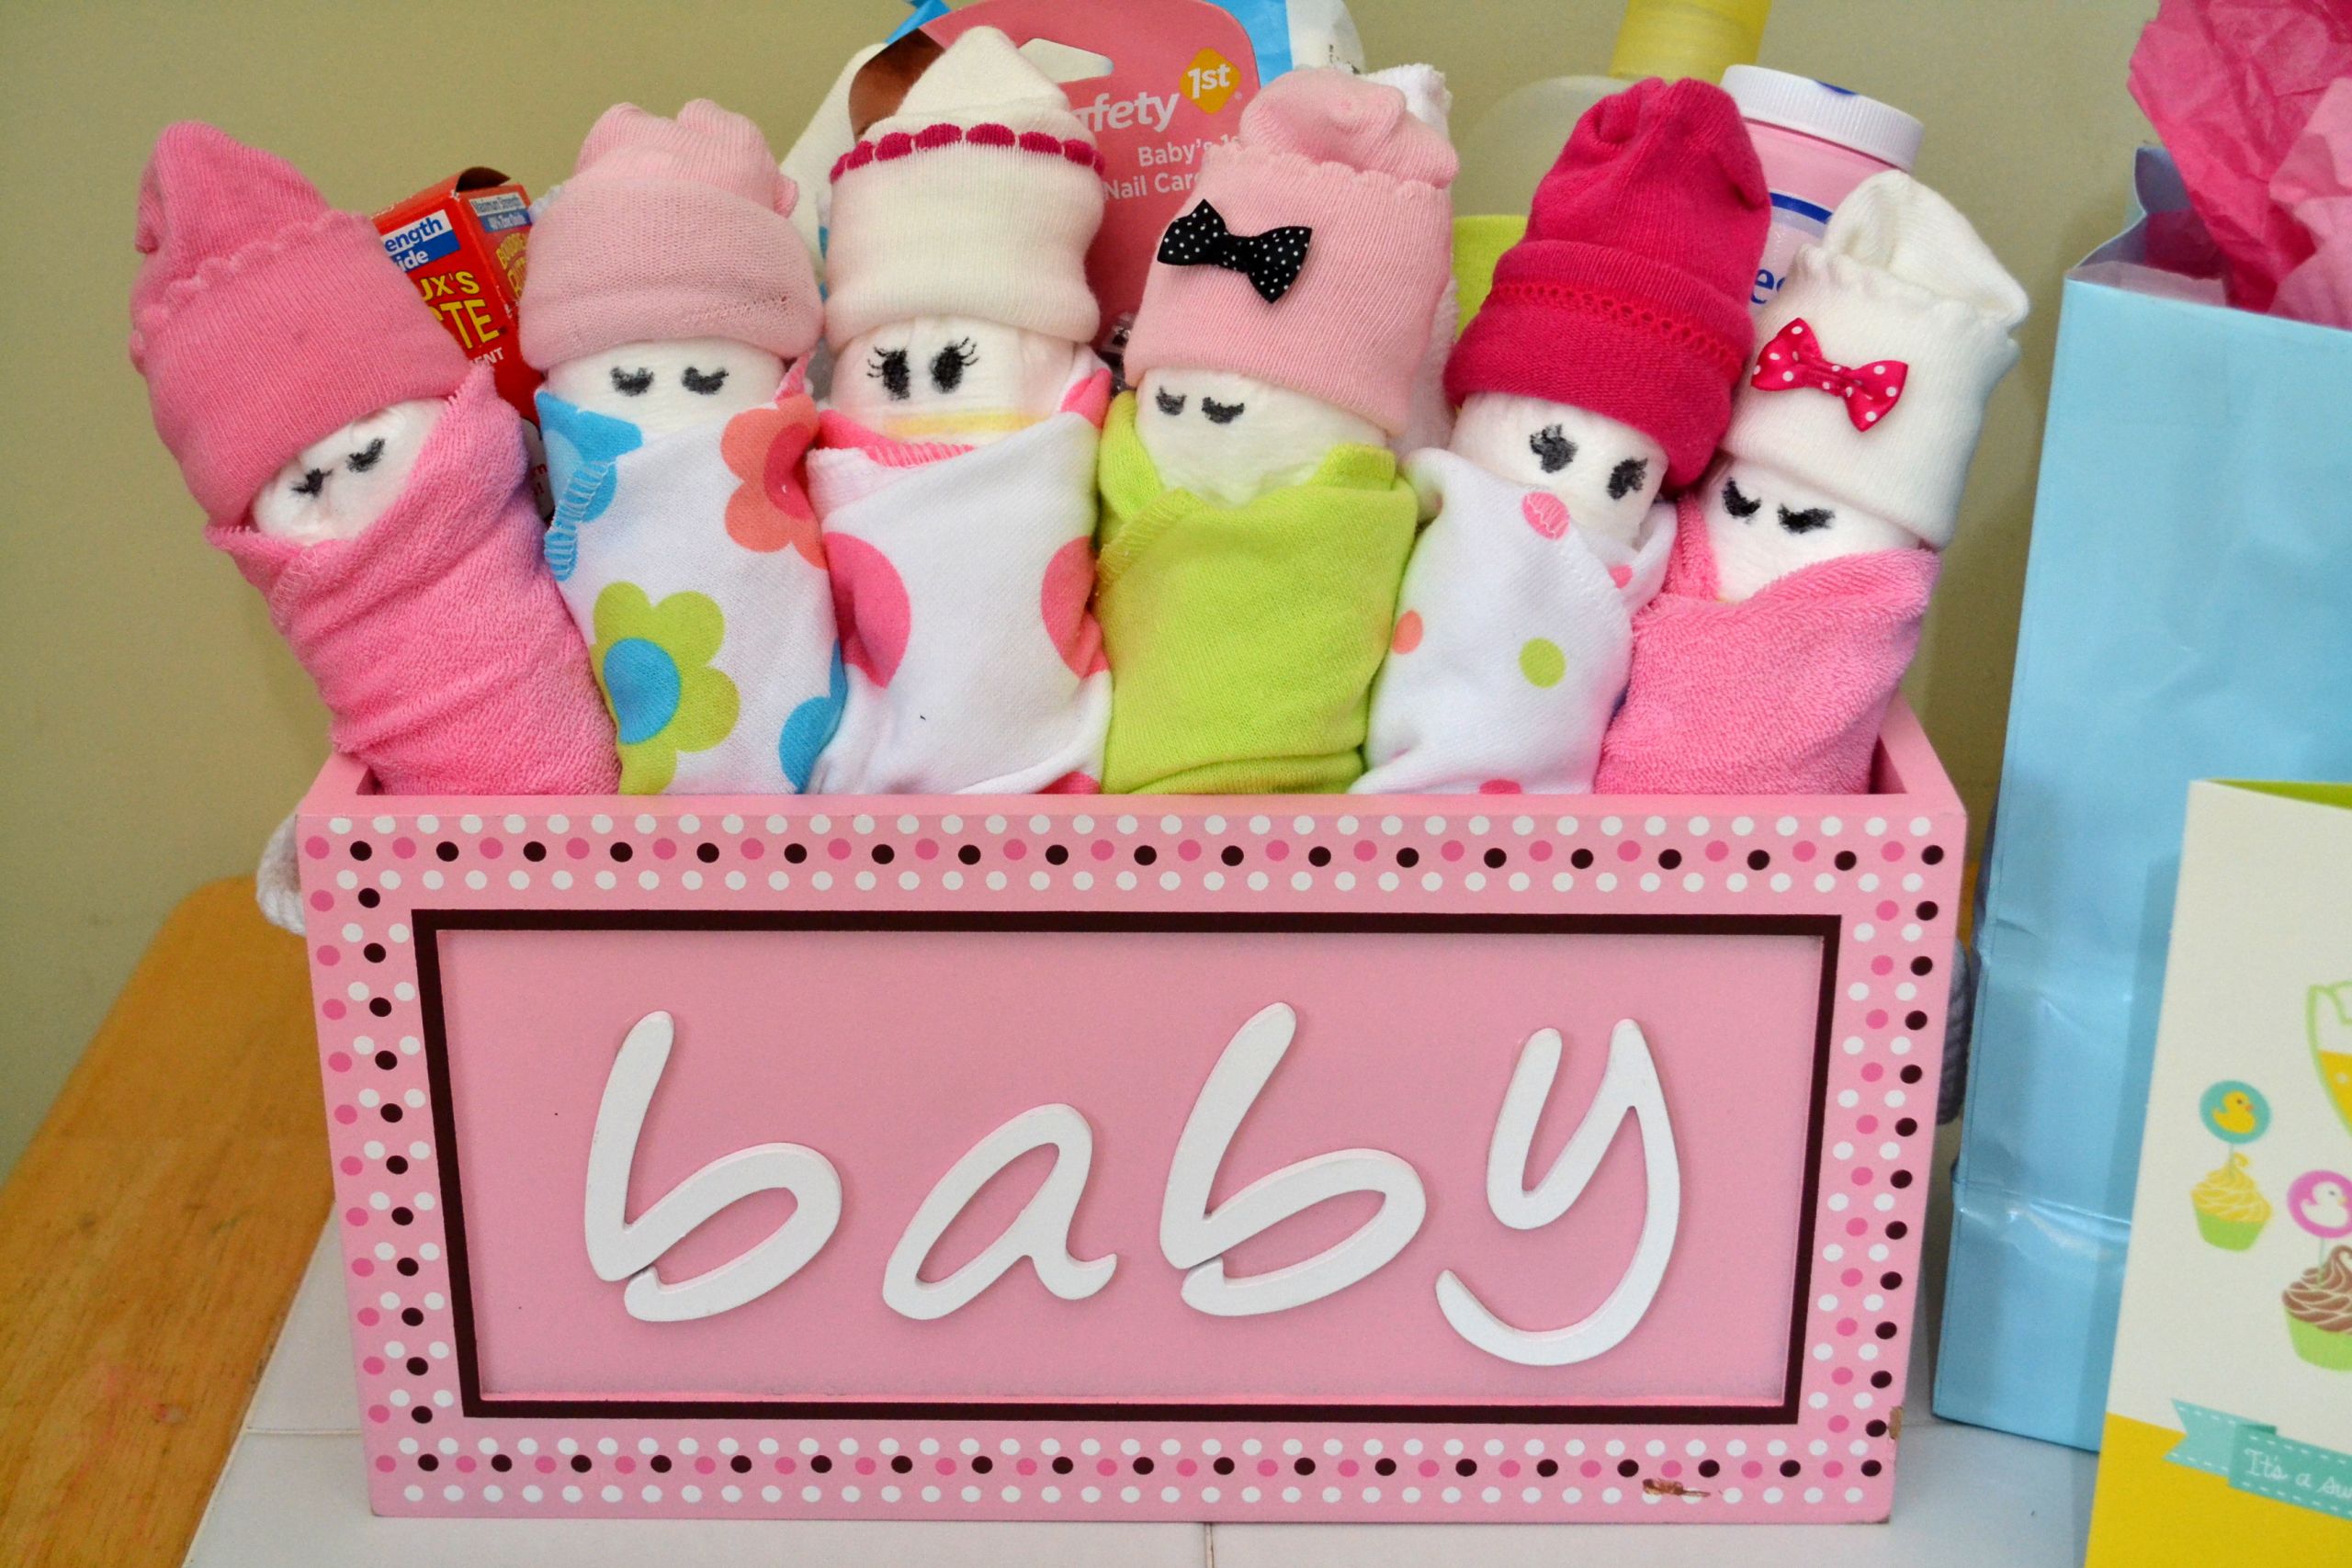 Gift Ideas For Baby Showers
 Essential Baby Shower Gifts & DIY Diaper Babies